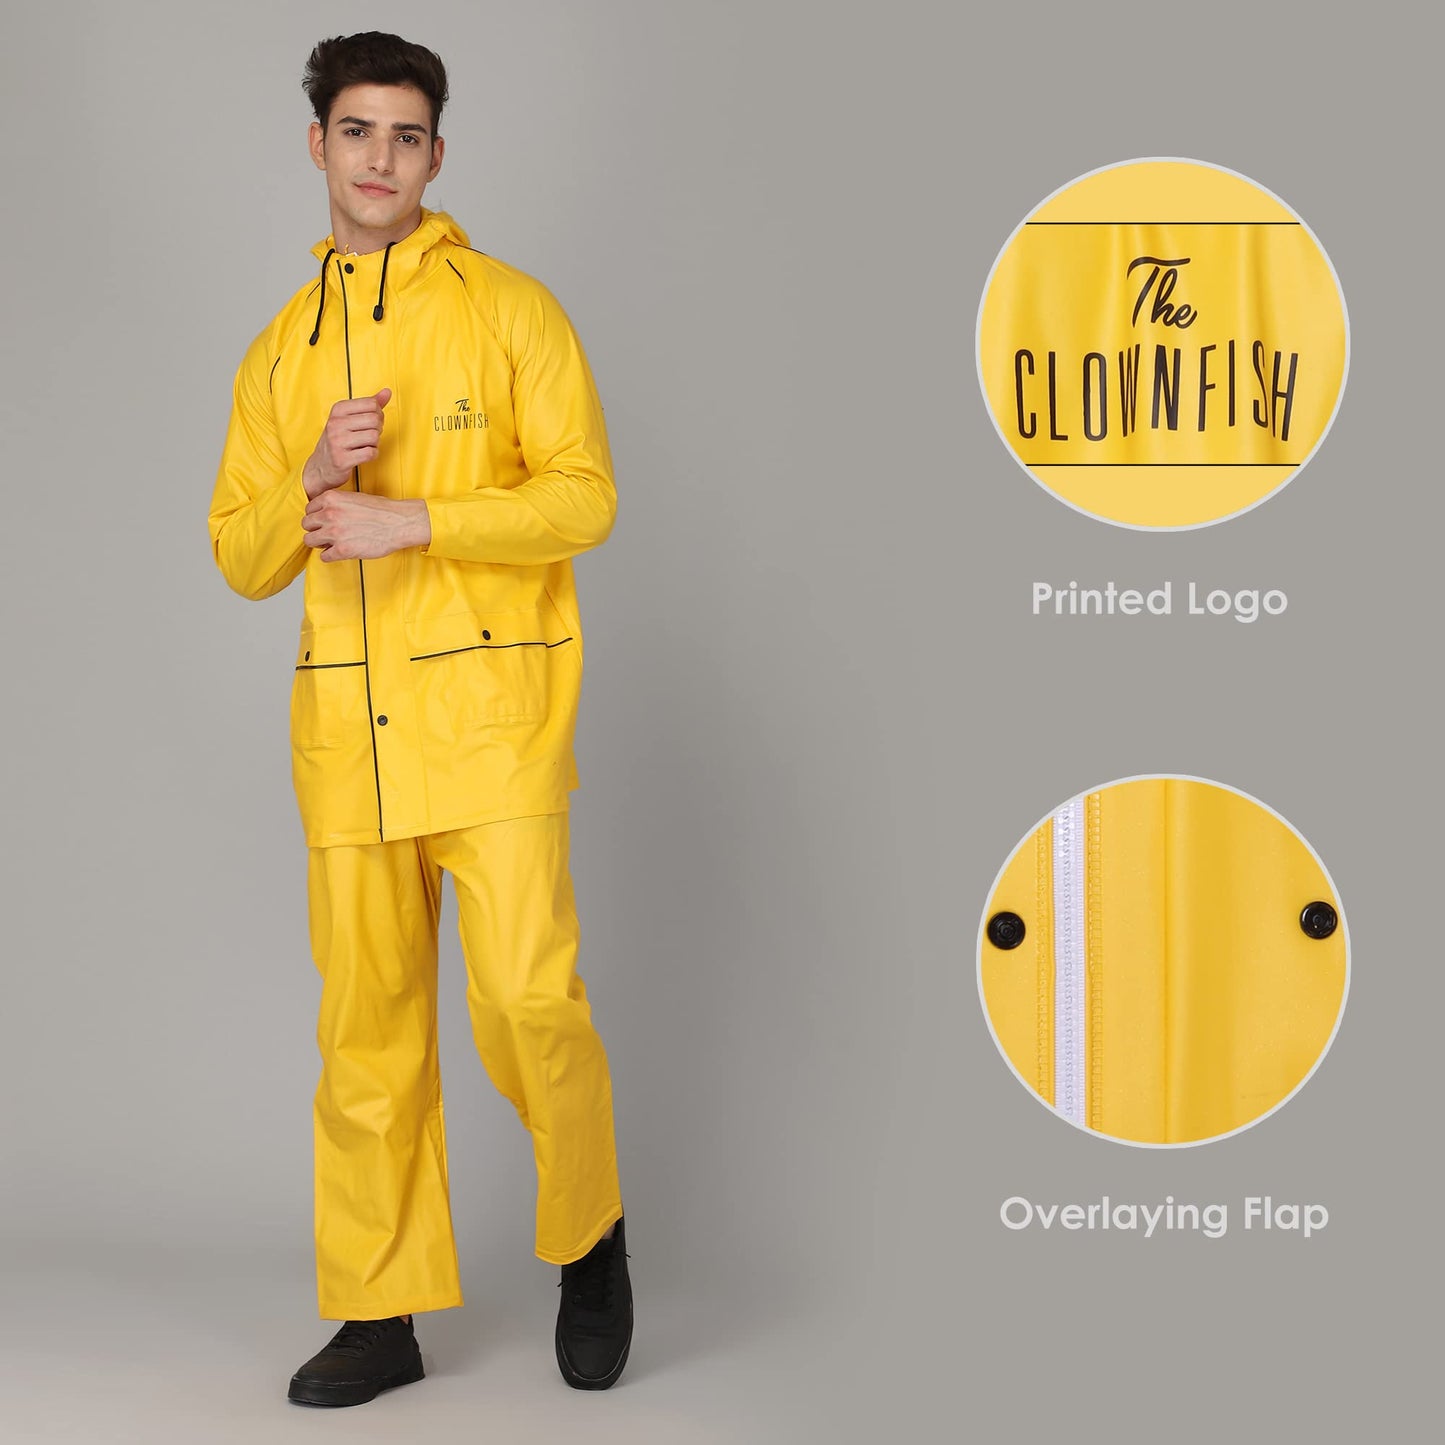 THE CLOWNFISH Rain Coat for Men Waterproof for Bike Reversible Double Layer with Hood Raincoat for Men. Set of Top and Bottom Packed in a Storage Bag Opener Pro Series (Blue, XXX-Large)